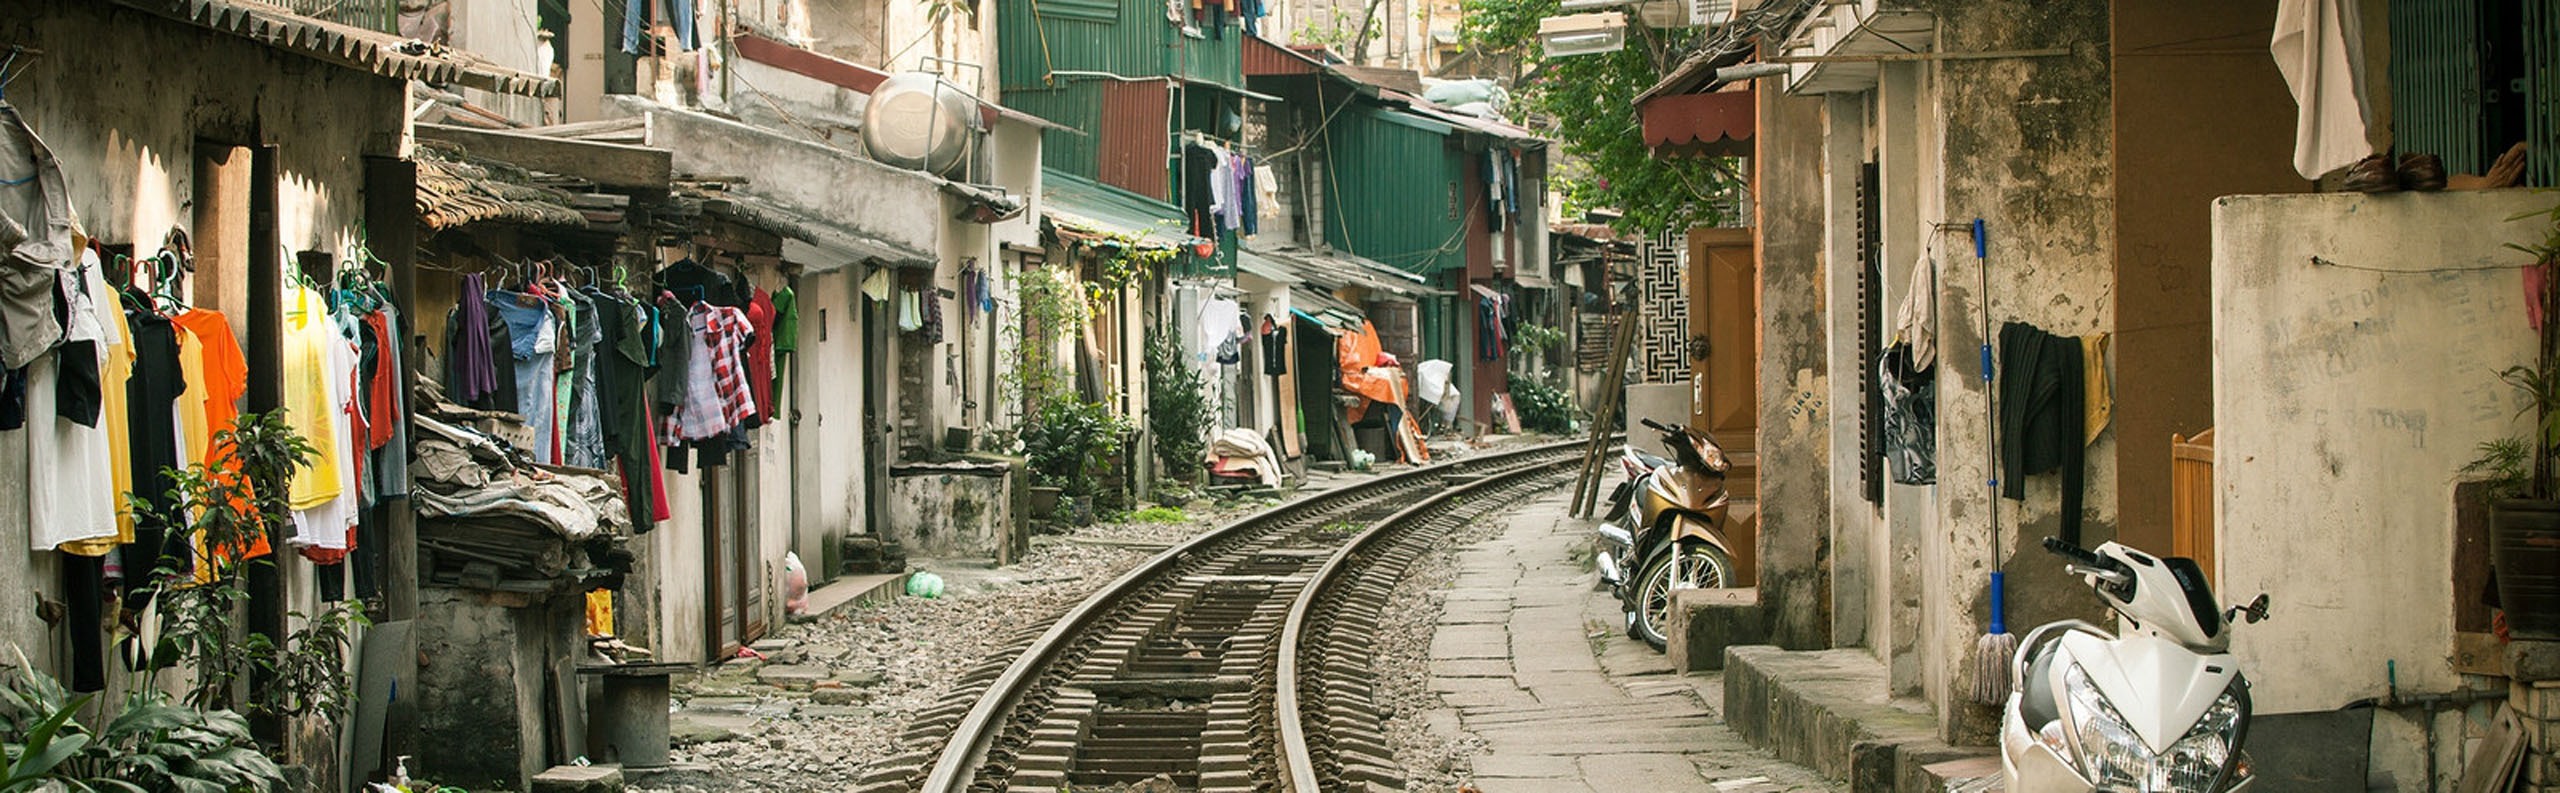 Plan a Trip to Hanoi and Choosing What Sights to See